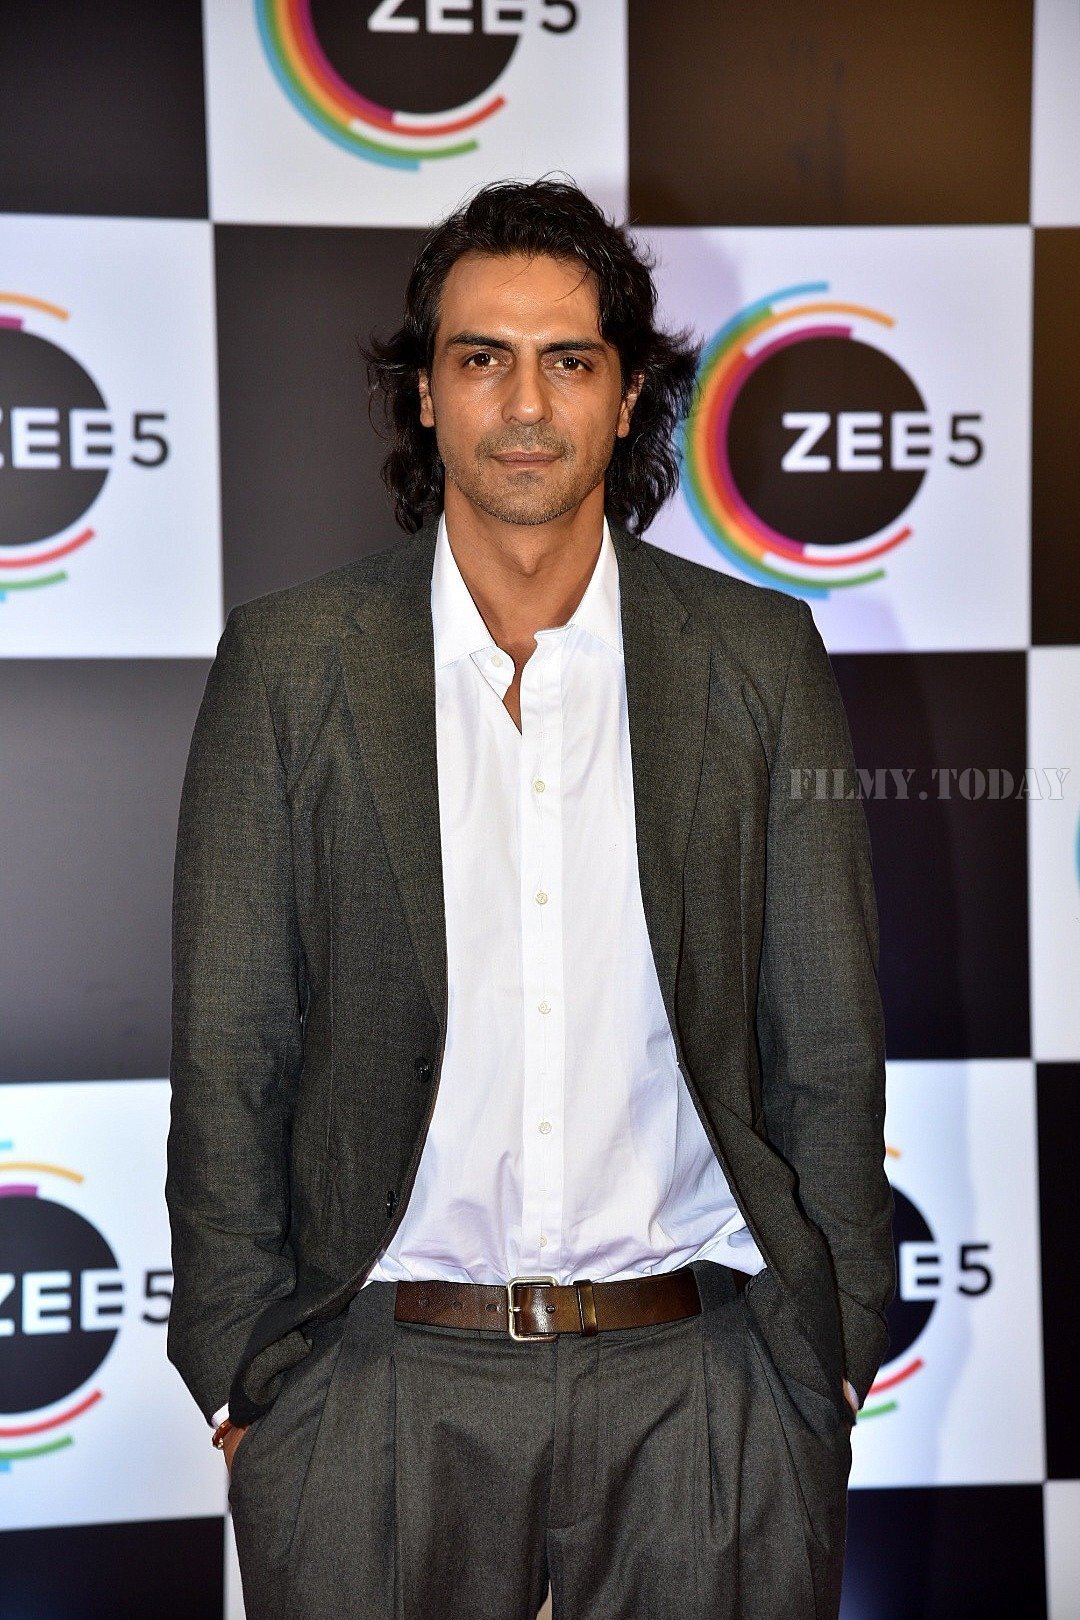 Arjun Rampal - Photos: Red Carpet Of 1 Year Anniversary Of Zee5 App | Picture 1627473